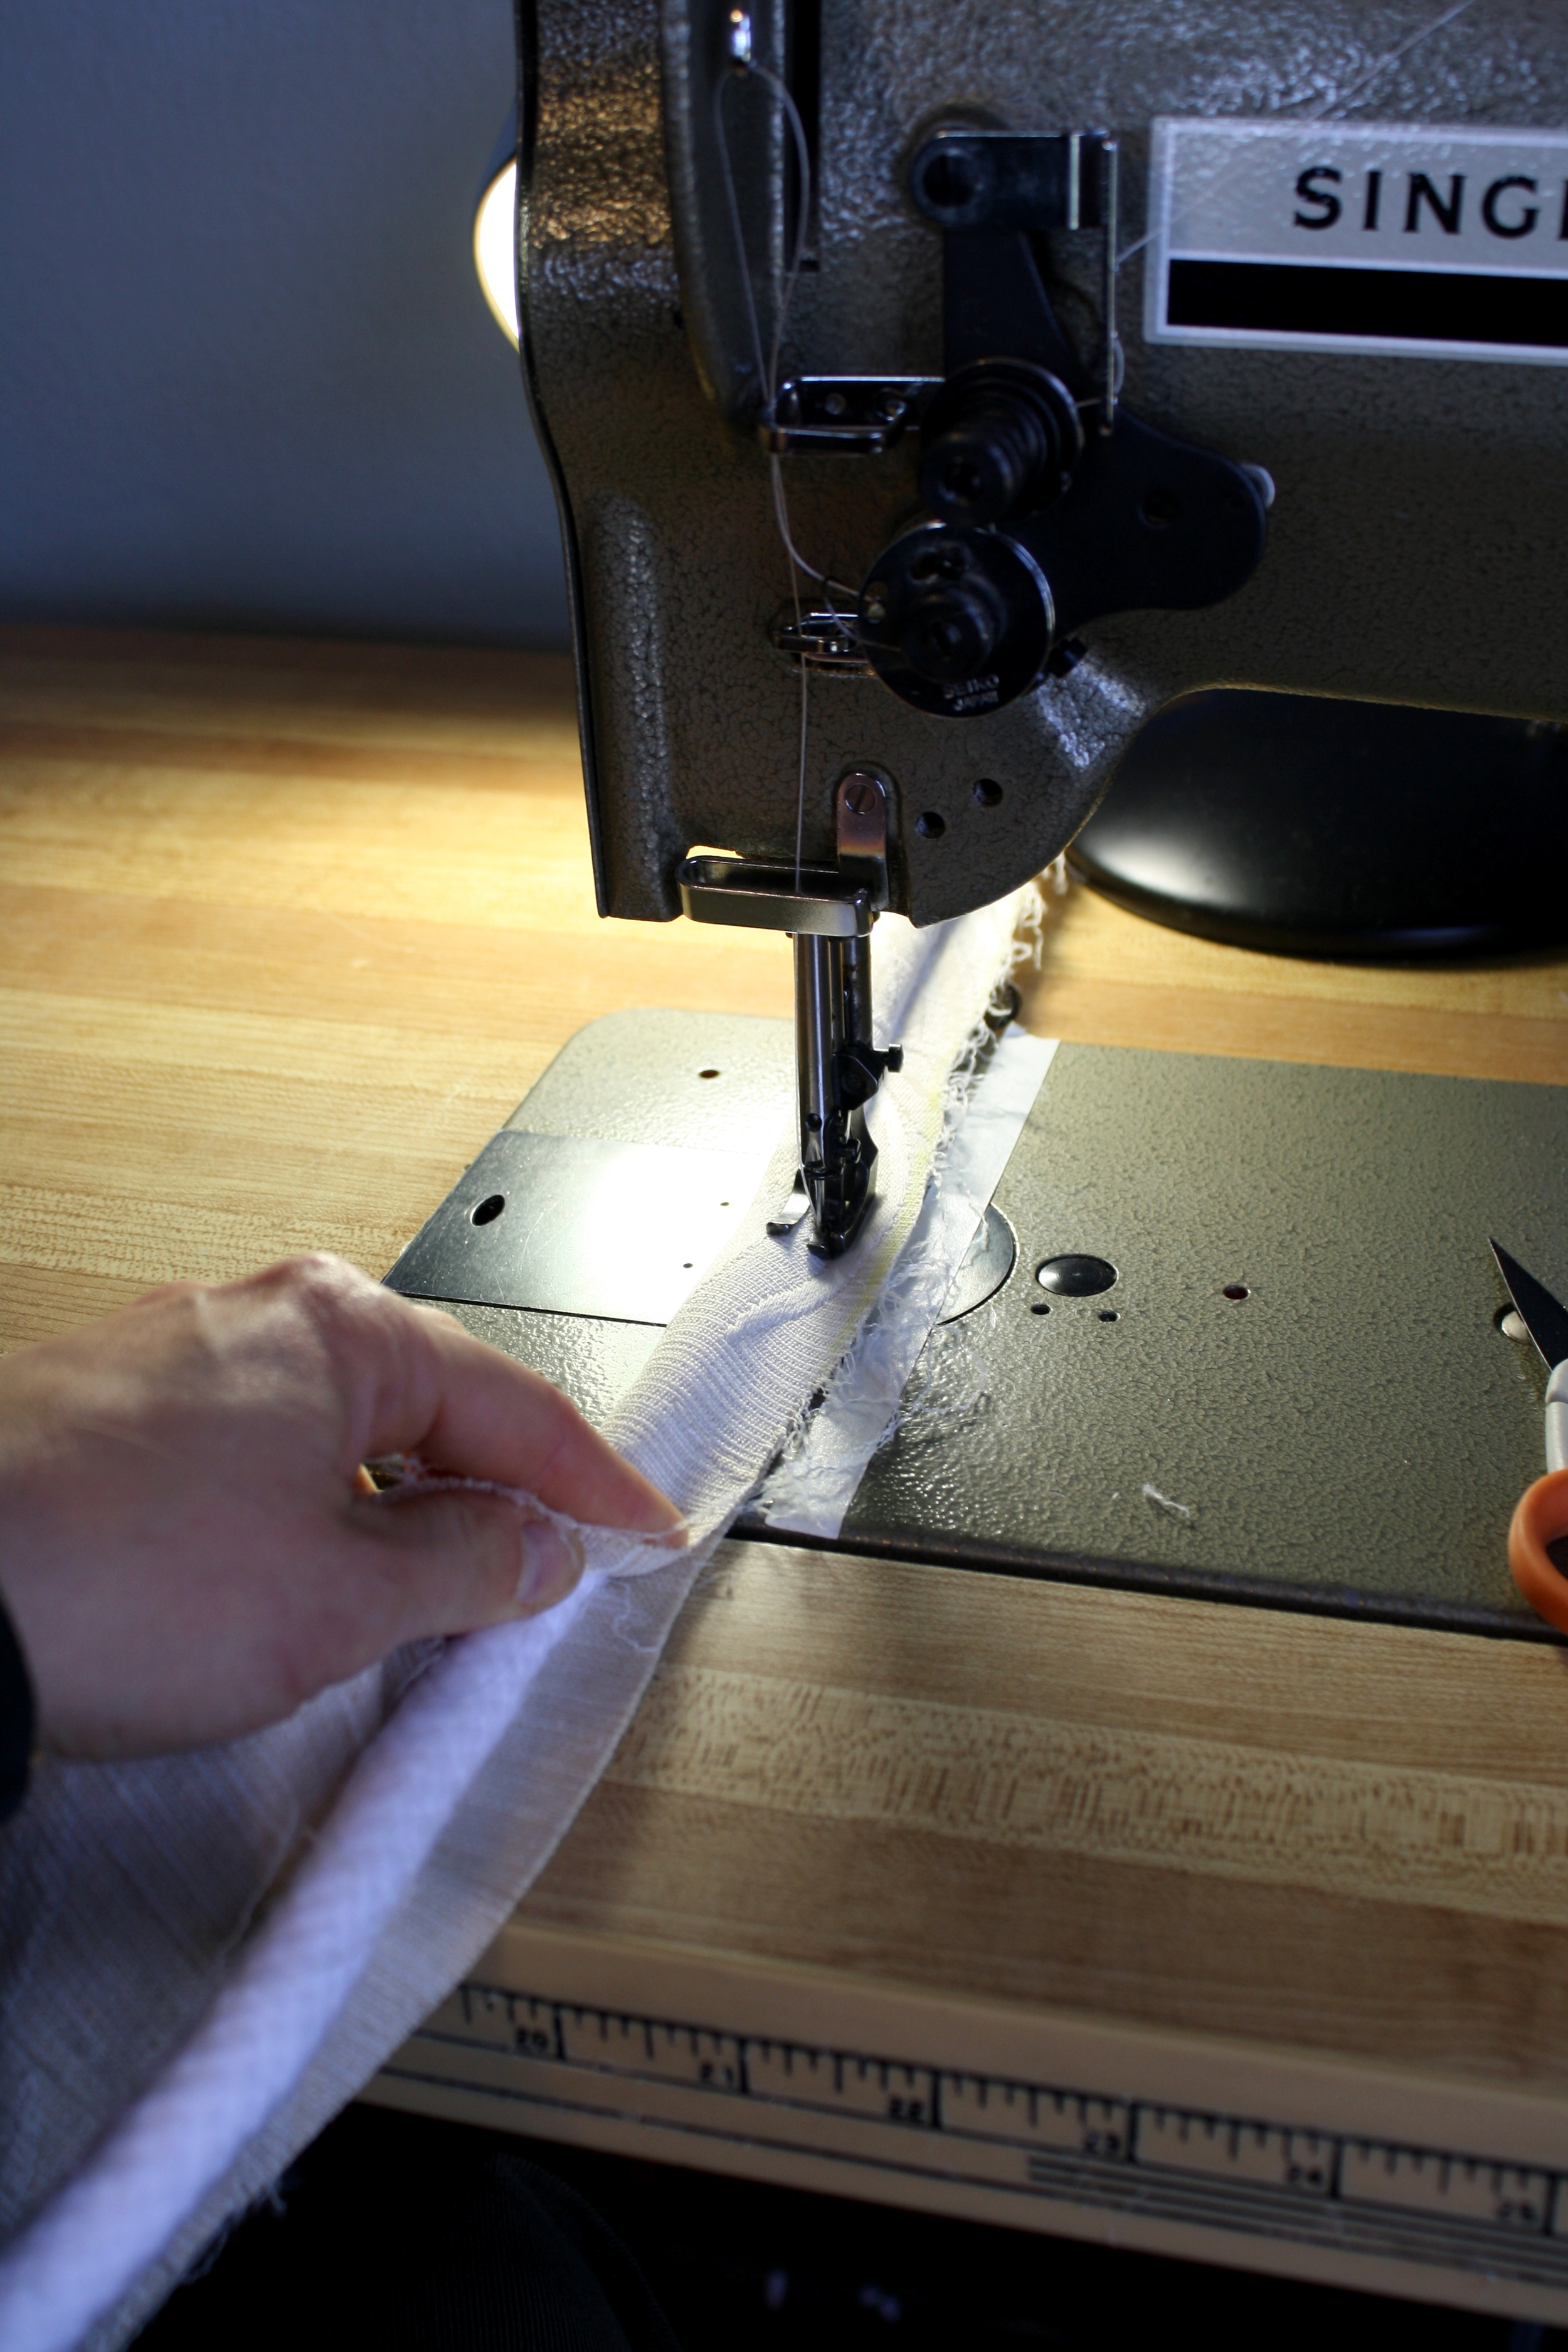  I used a specialty foot for my machine to sew the larger welting. The basic process is to cut strips of fabric into which the cording is sewn. &nbsp;A welting foot for the sewing machine assists in ensuring that the cording is sewn into the fabric s